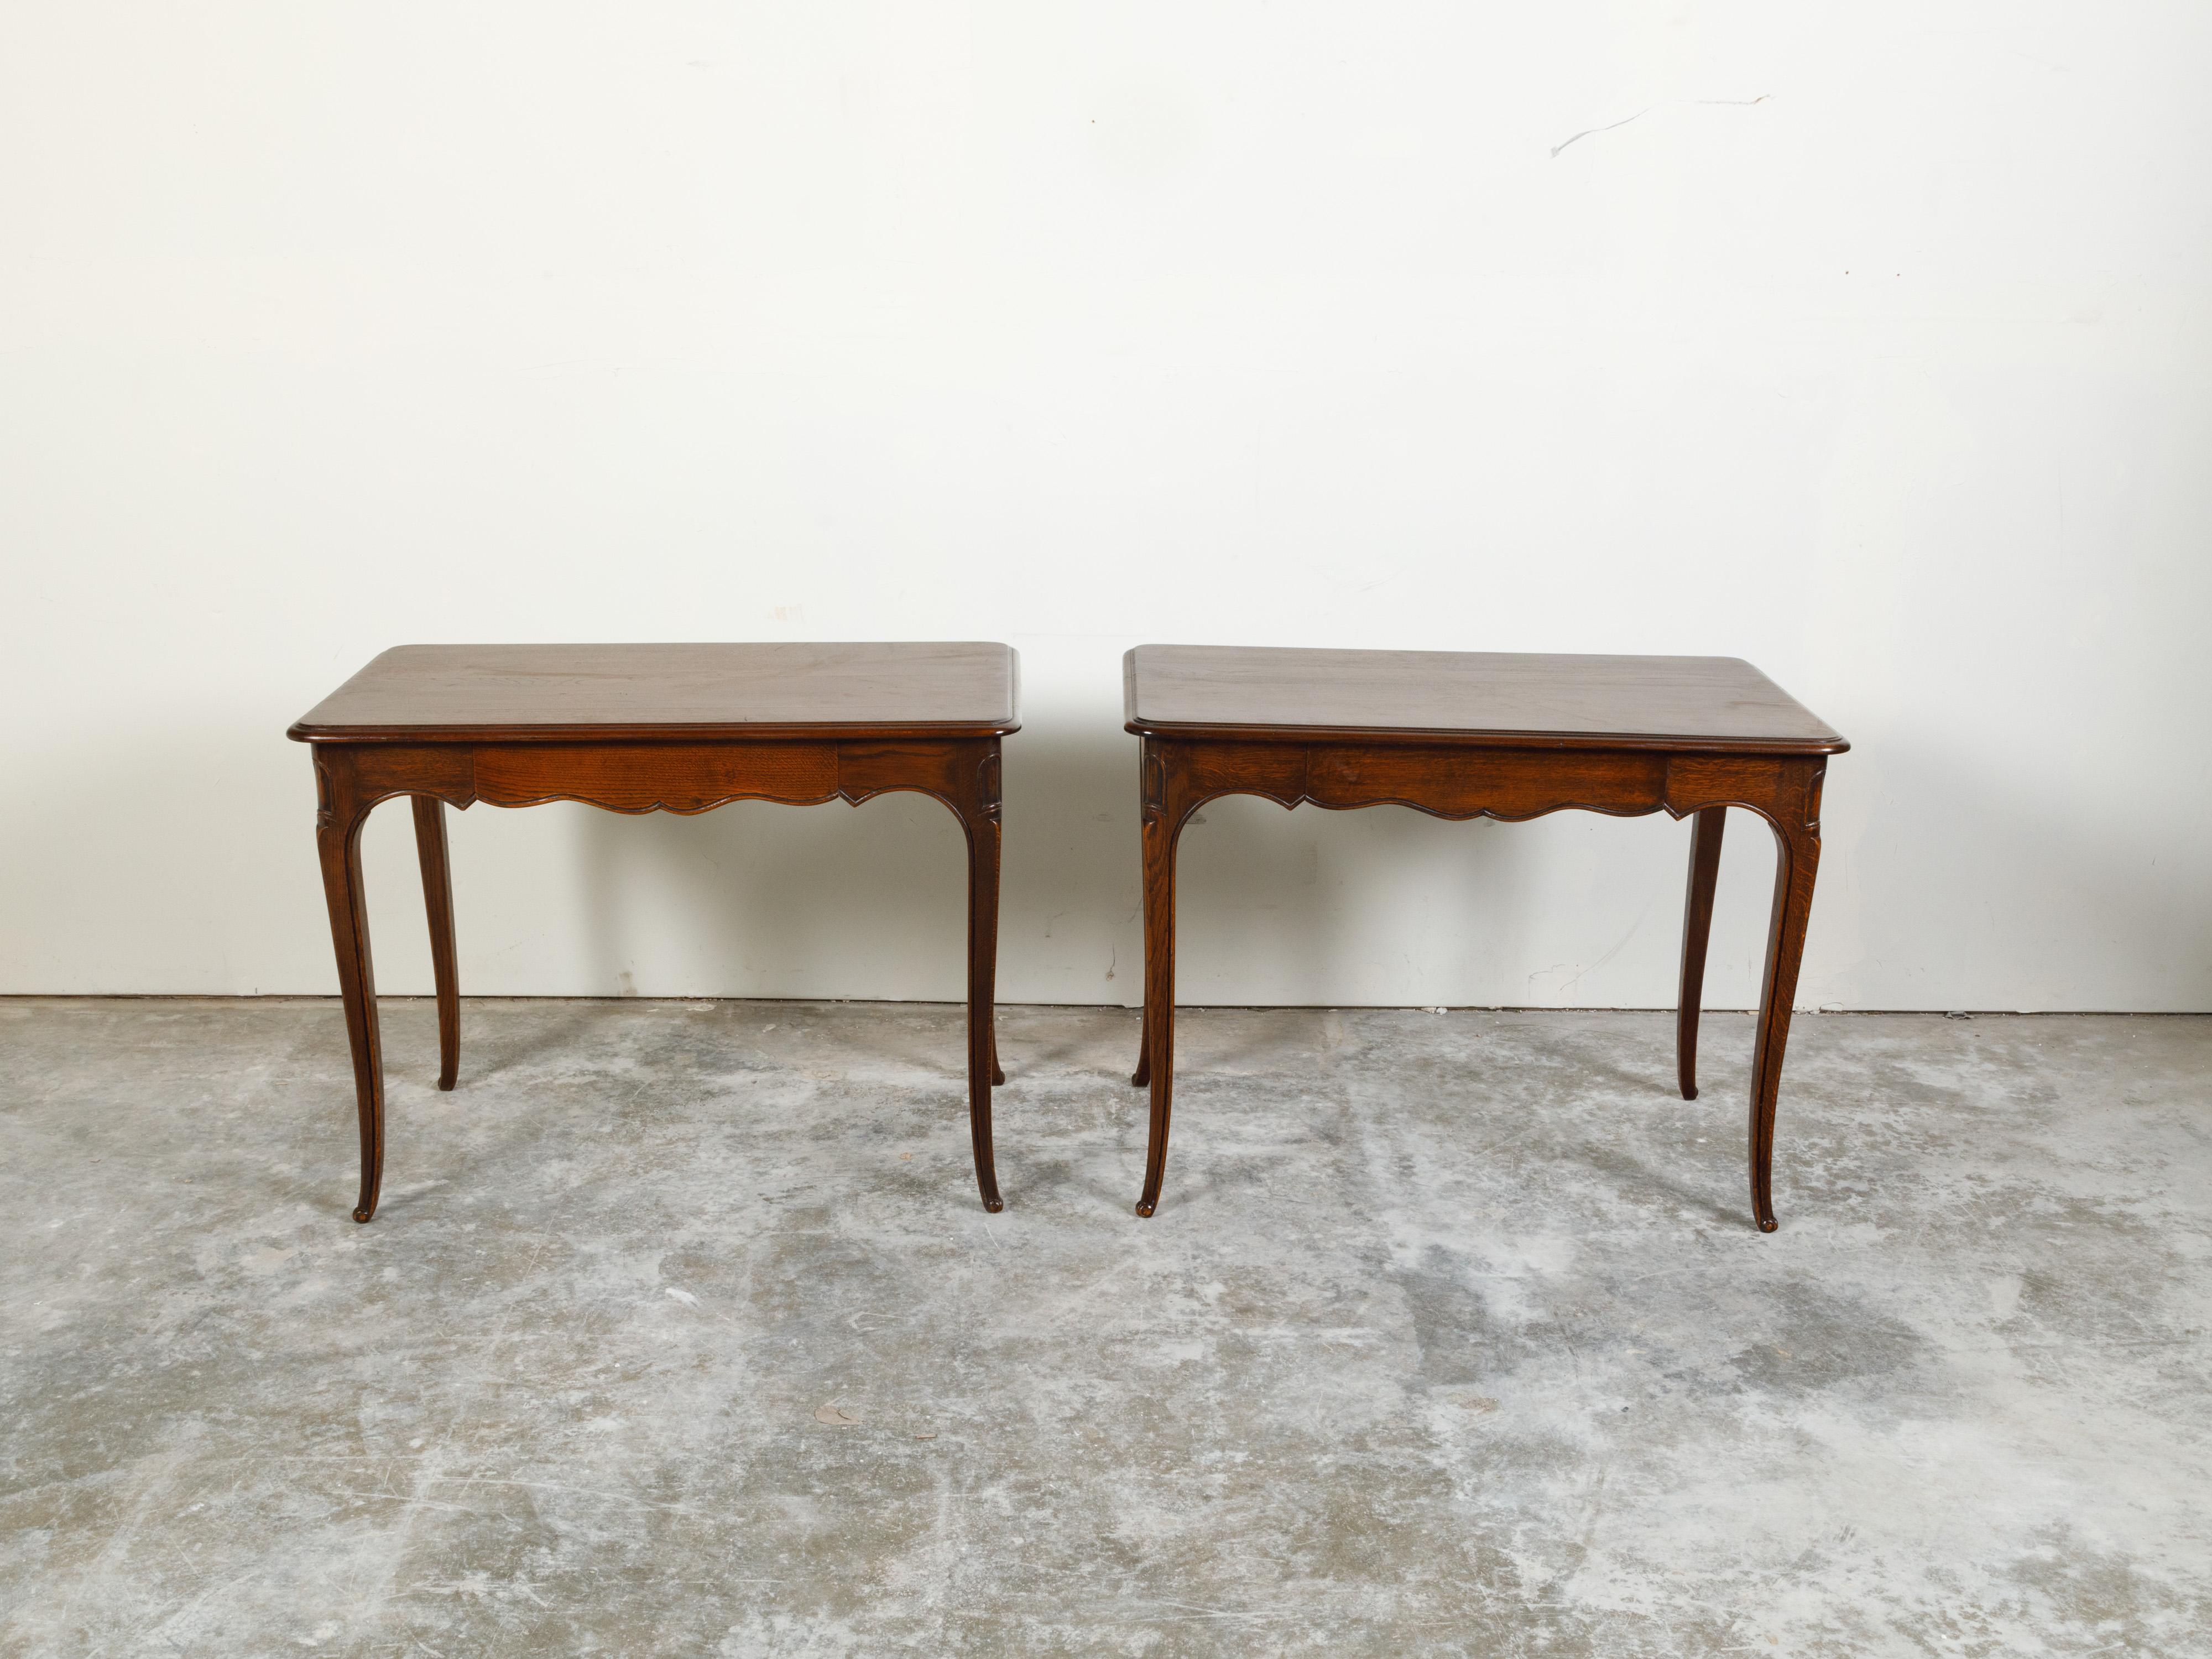 A pair of French oak console tables from the early 20th century, with single drawers, scalloped aprons and cabriole legs. Created in France during the Turn of the Century, each of this pair of console tables features a rectangular top with rounded